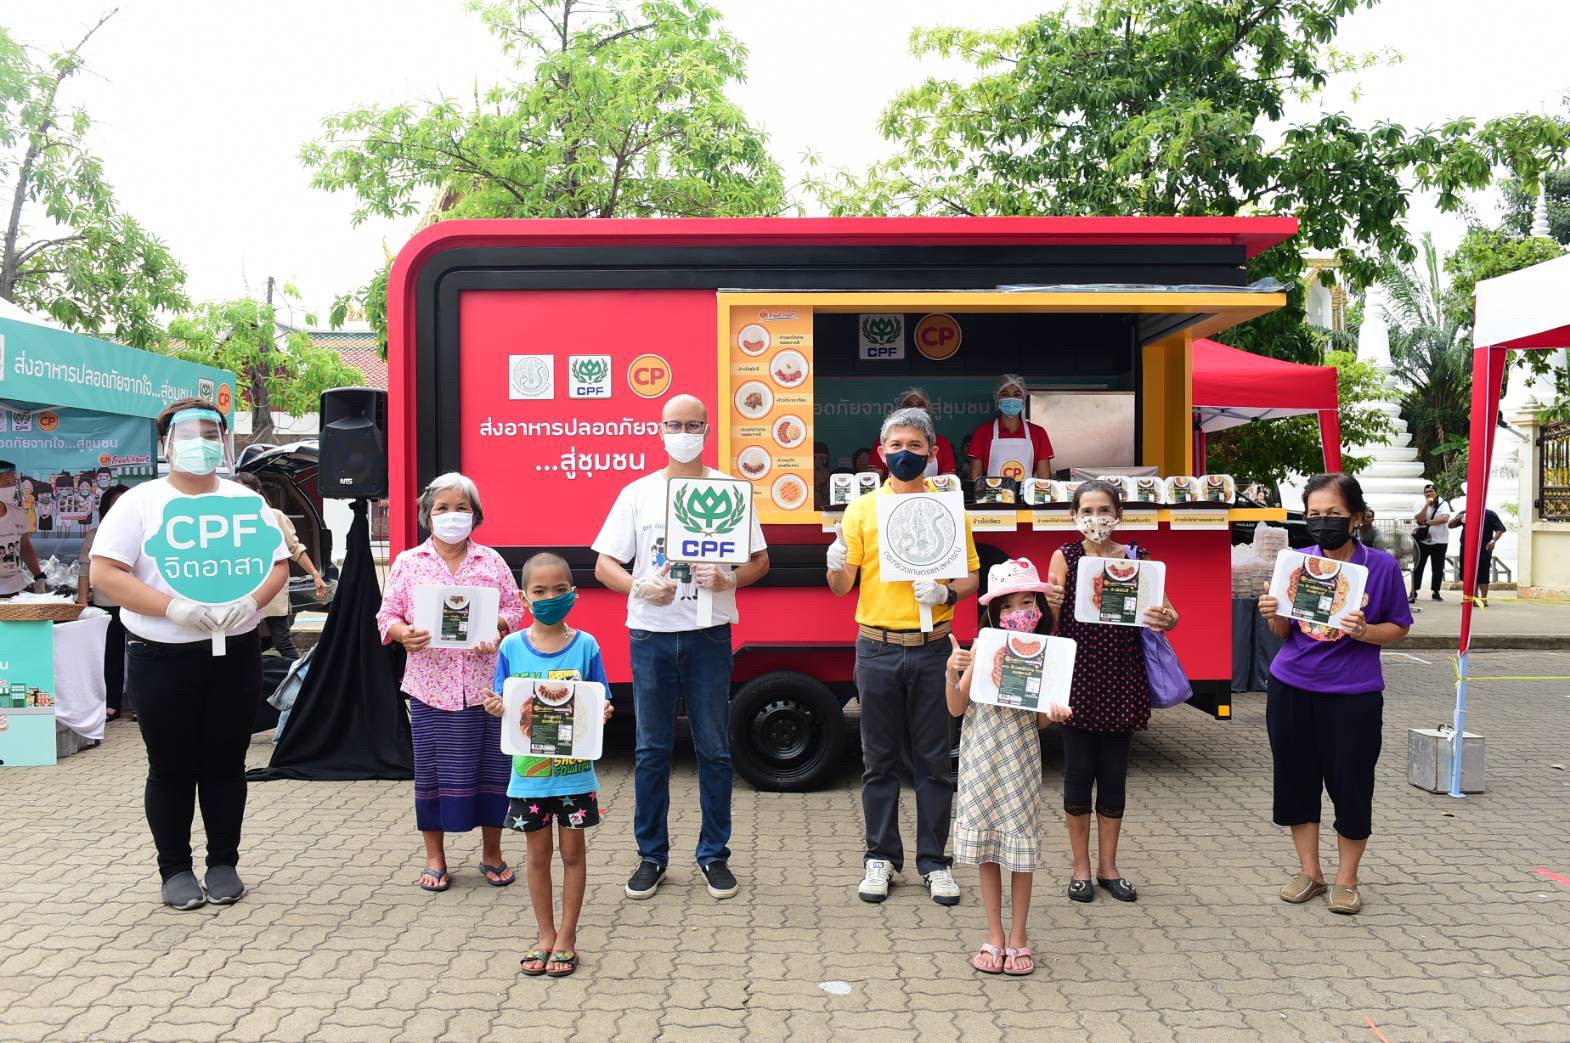 CPF’s Food truck serves ready-to-eat meal to Wat Dusitaram’s community